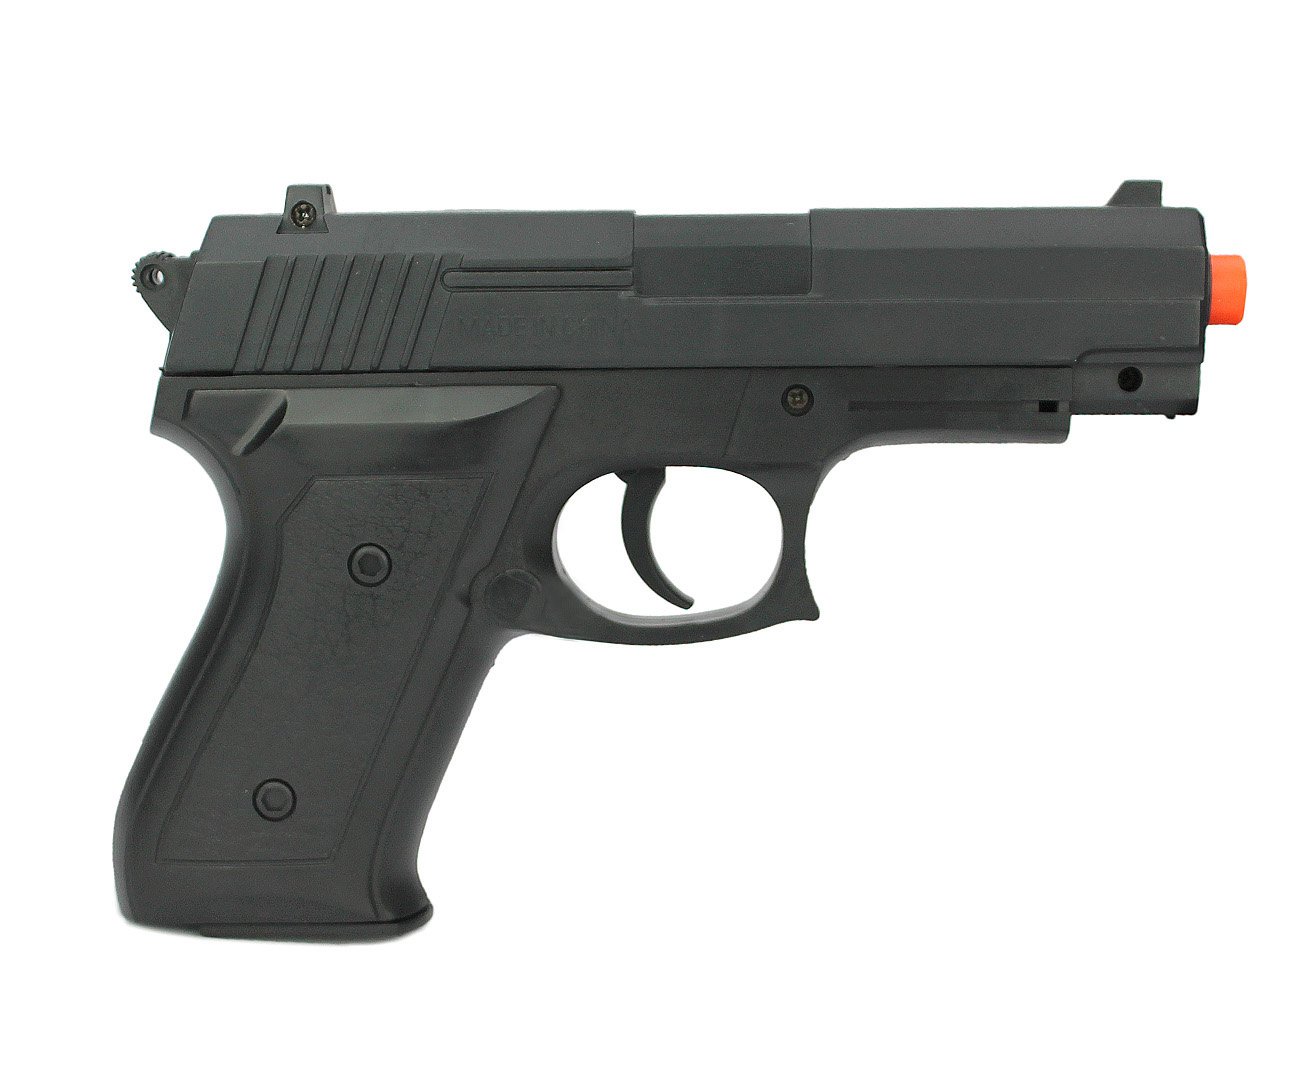 Pistola De Airsoft Wg-cyma 1918 Toy Abs 6mm